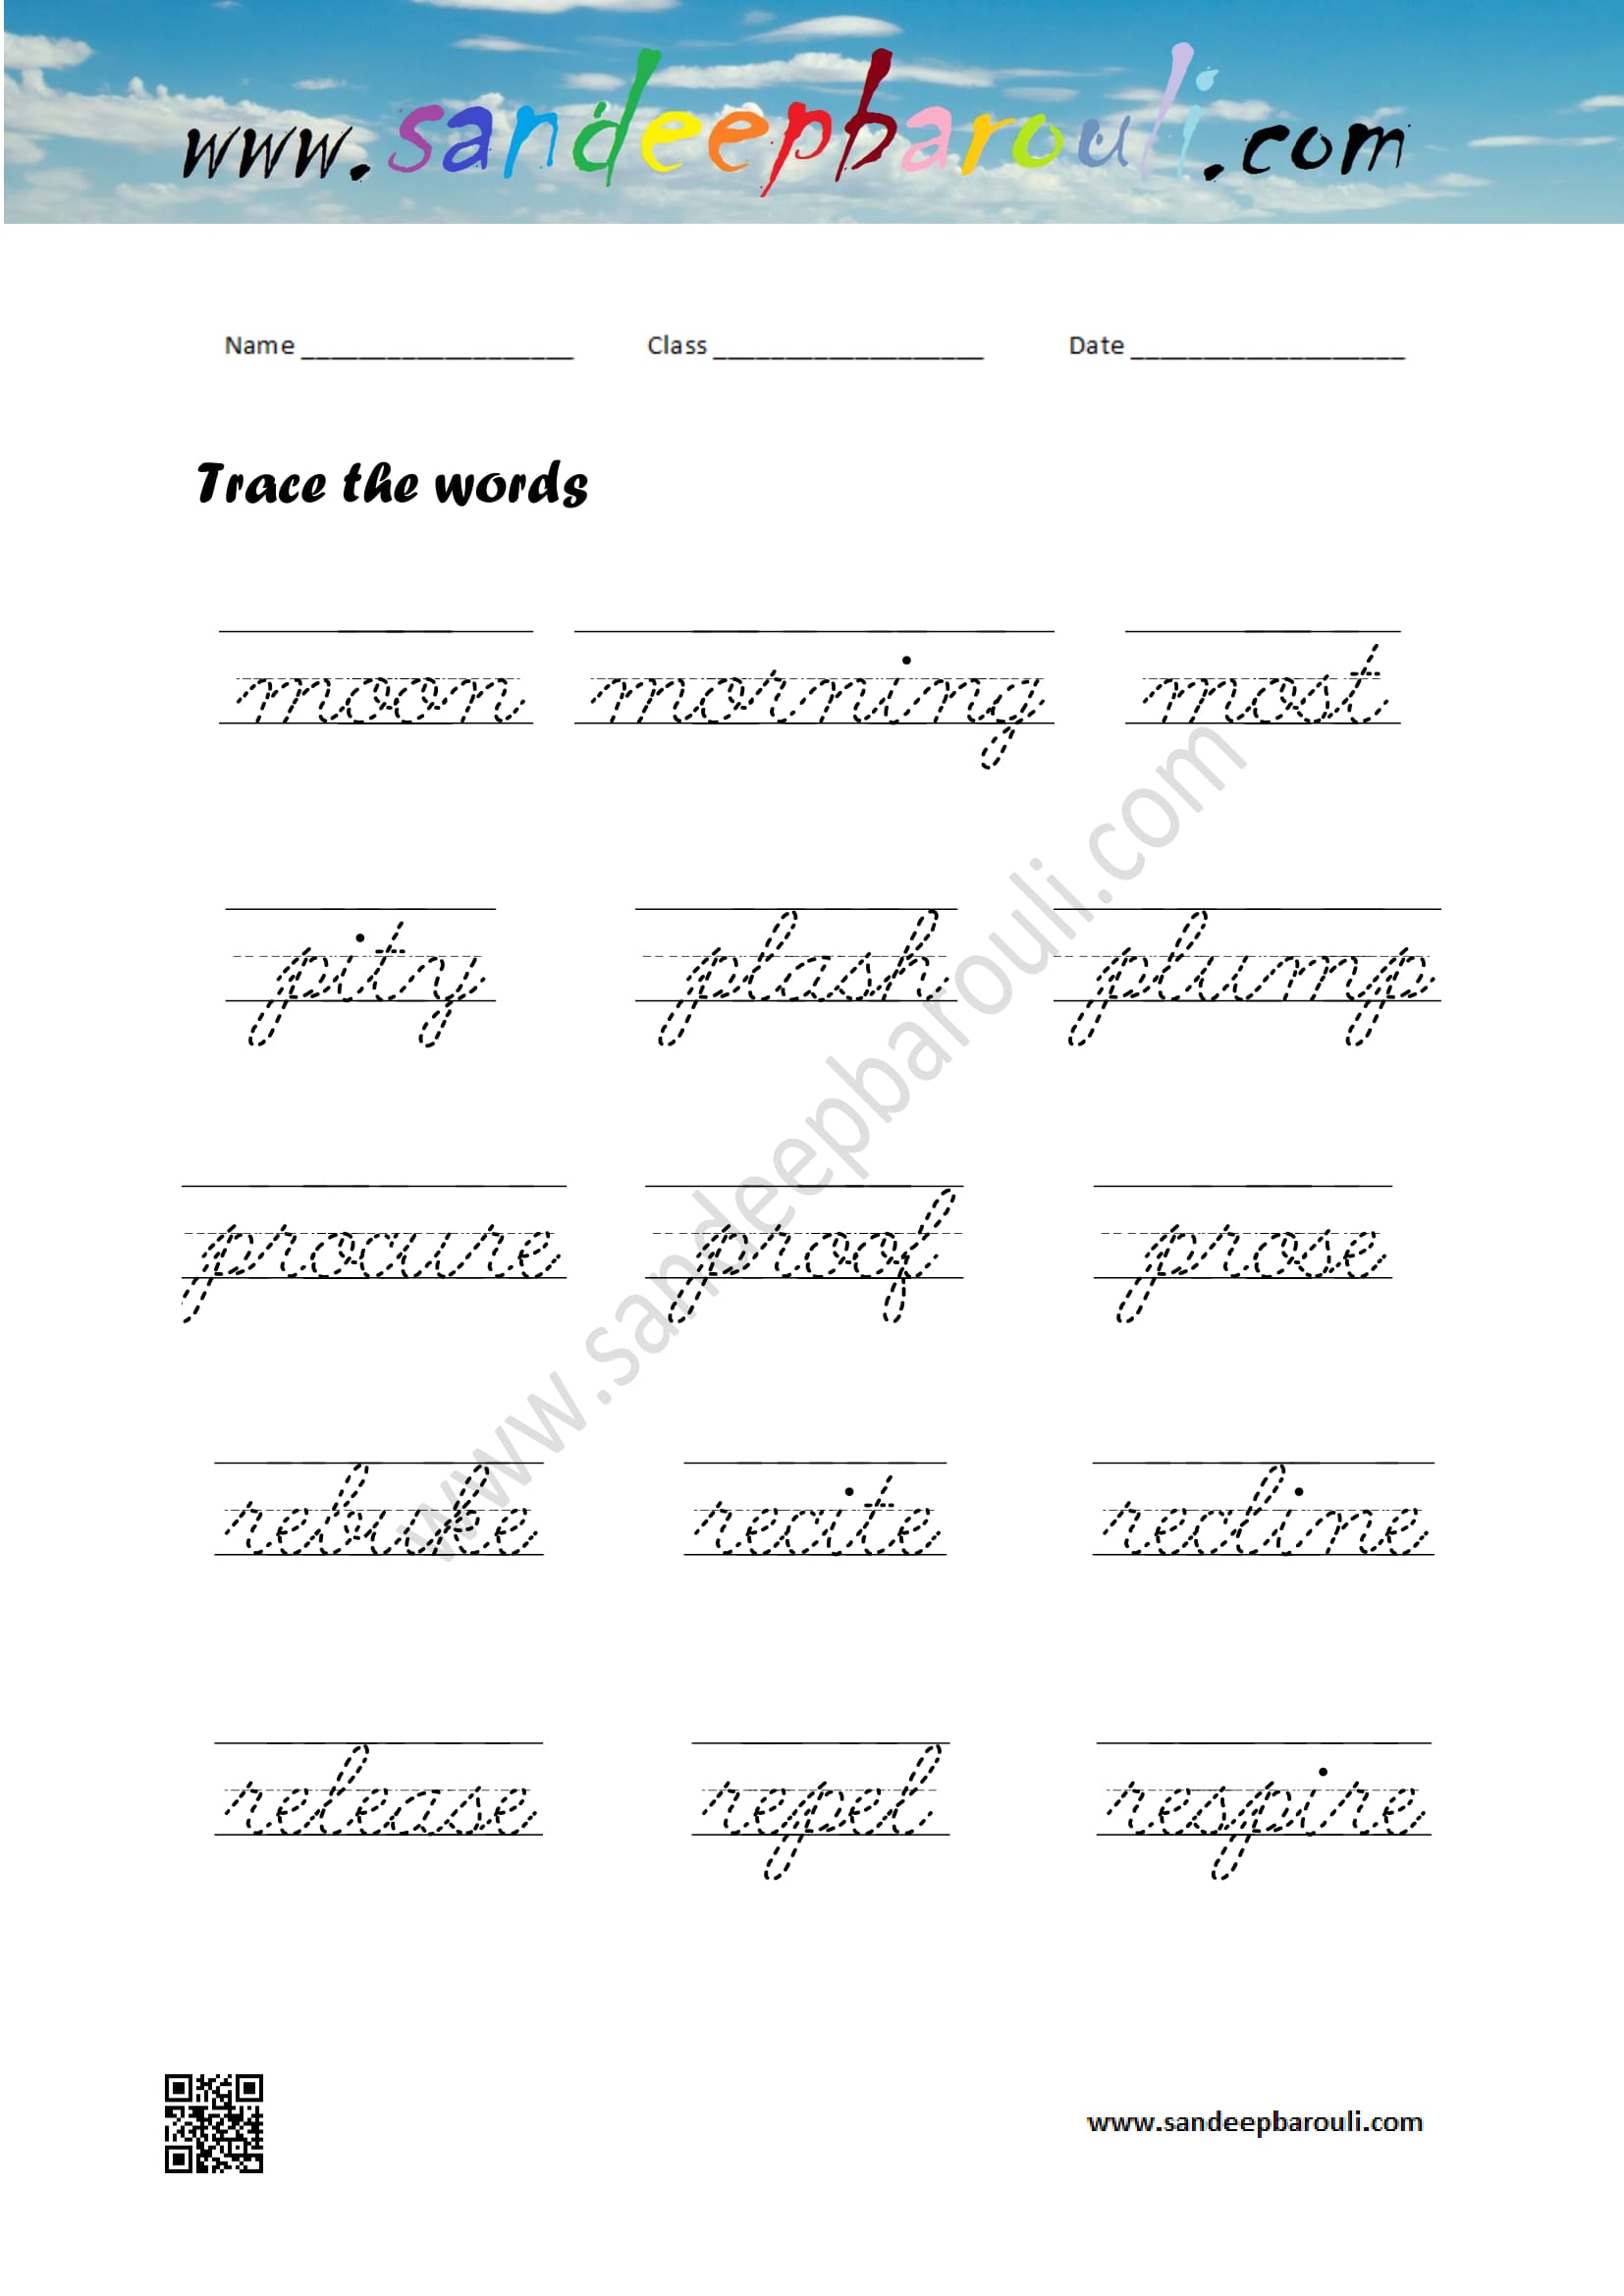 Cursive Writing Worksheet – Trace the words (45)